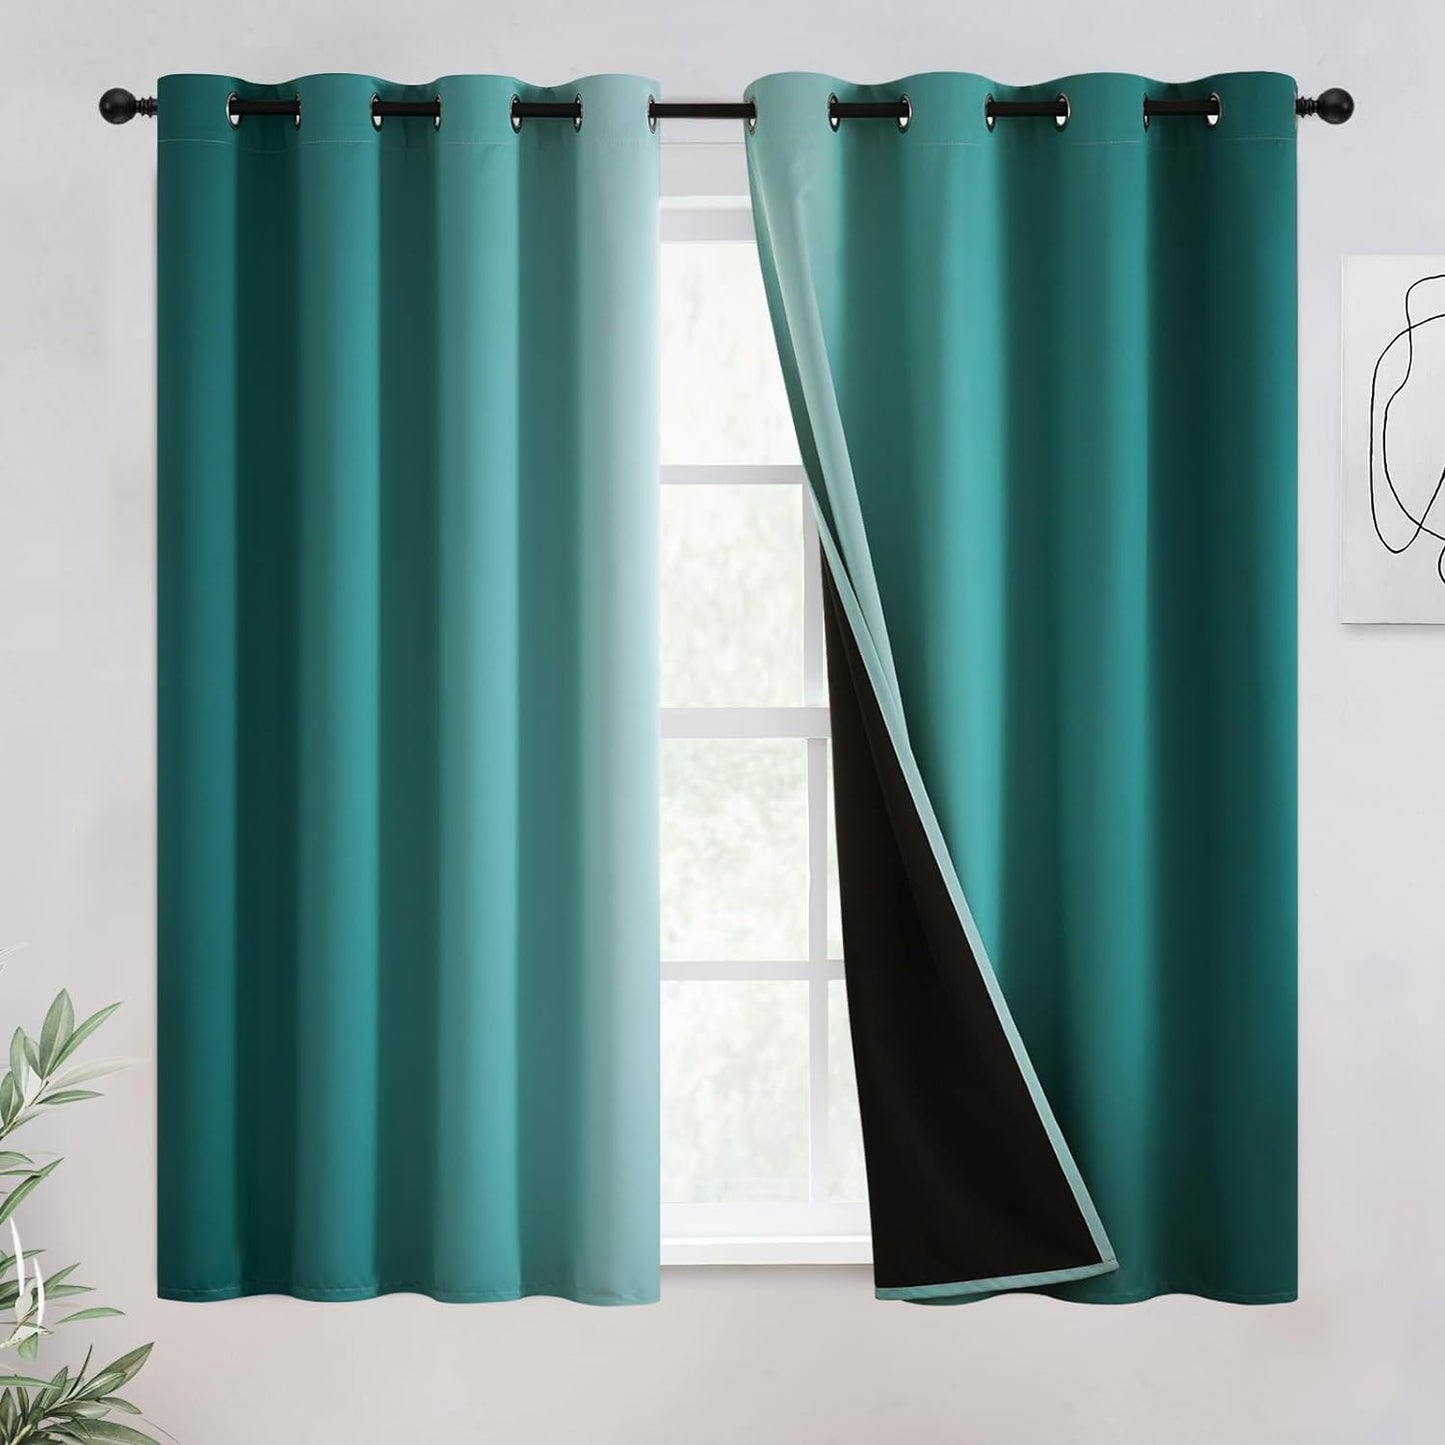 COSVIYA 100% Blackout Curtains & Drapes Ombre Purple Curtains 63 Inch Length 2 Panels,Full Room Darkening Grommet Gradient Insulated Thermal Window Curtains for Bedroom/Living Room,52X63 Inches  COSVIYA Teal To Greyish White 52W X 54L 